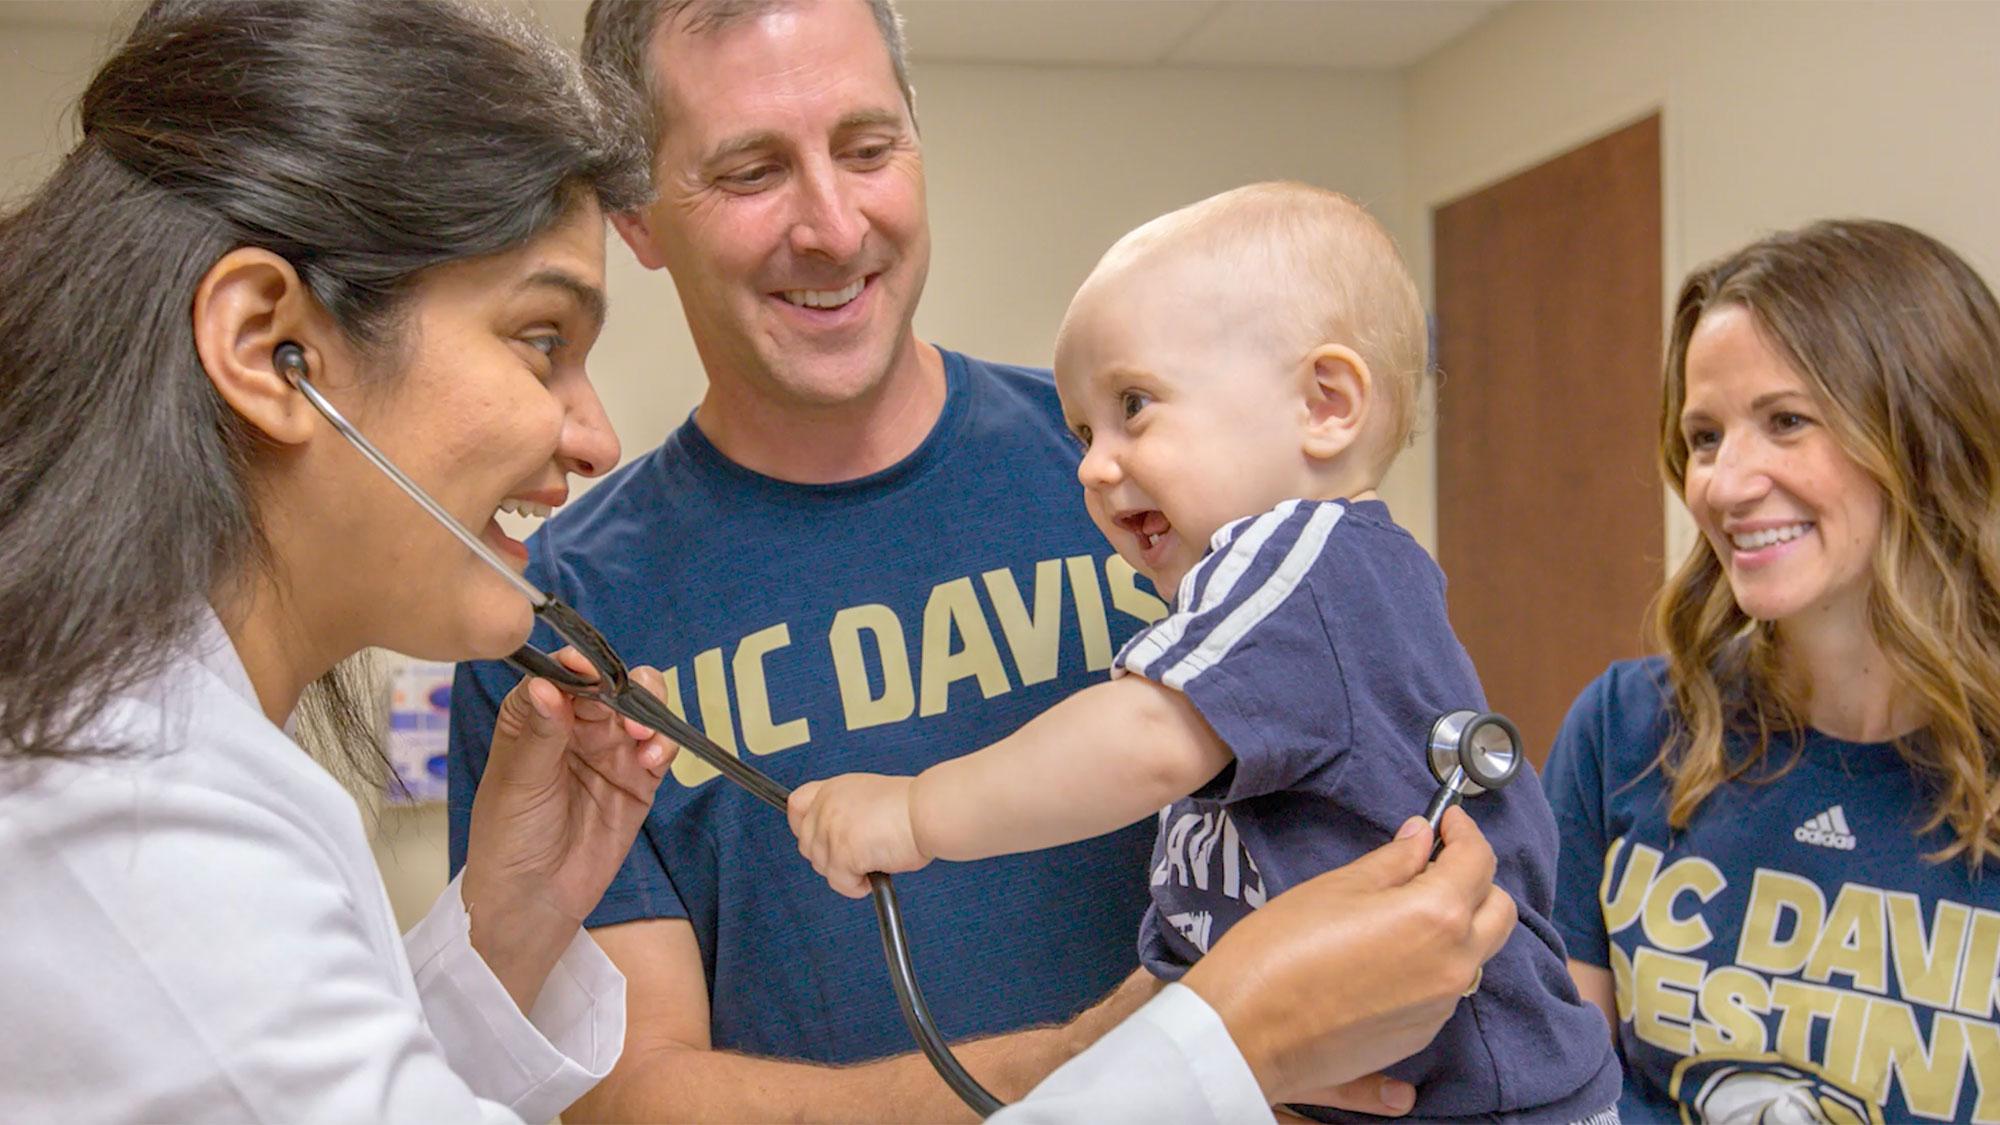 Two parents dressed in ˽̳ Davis Aggie gear present their baby to a doctor at a checkup